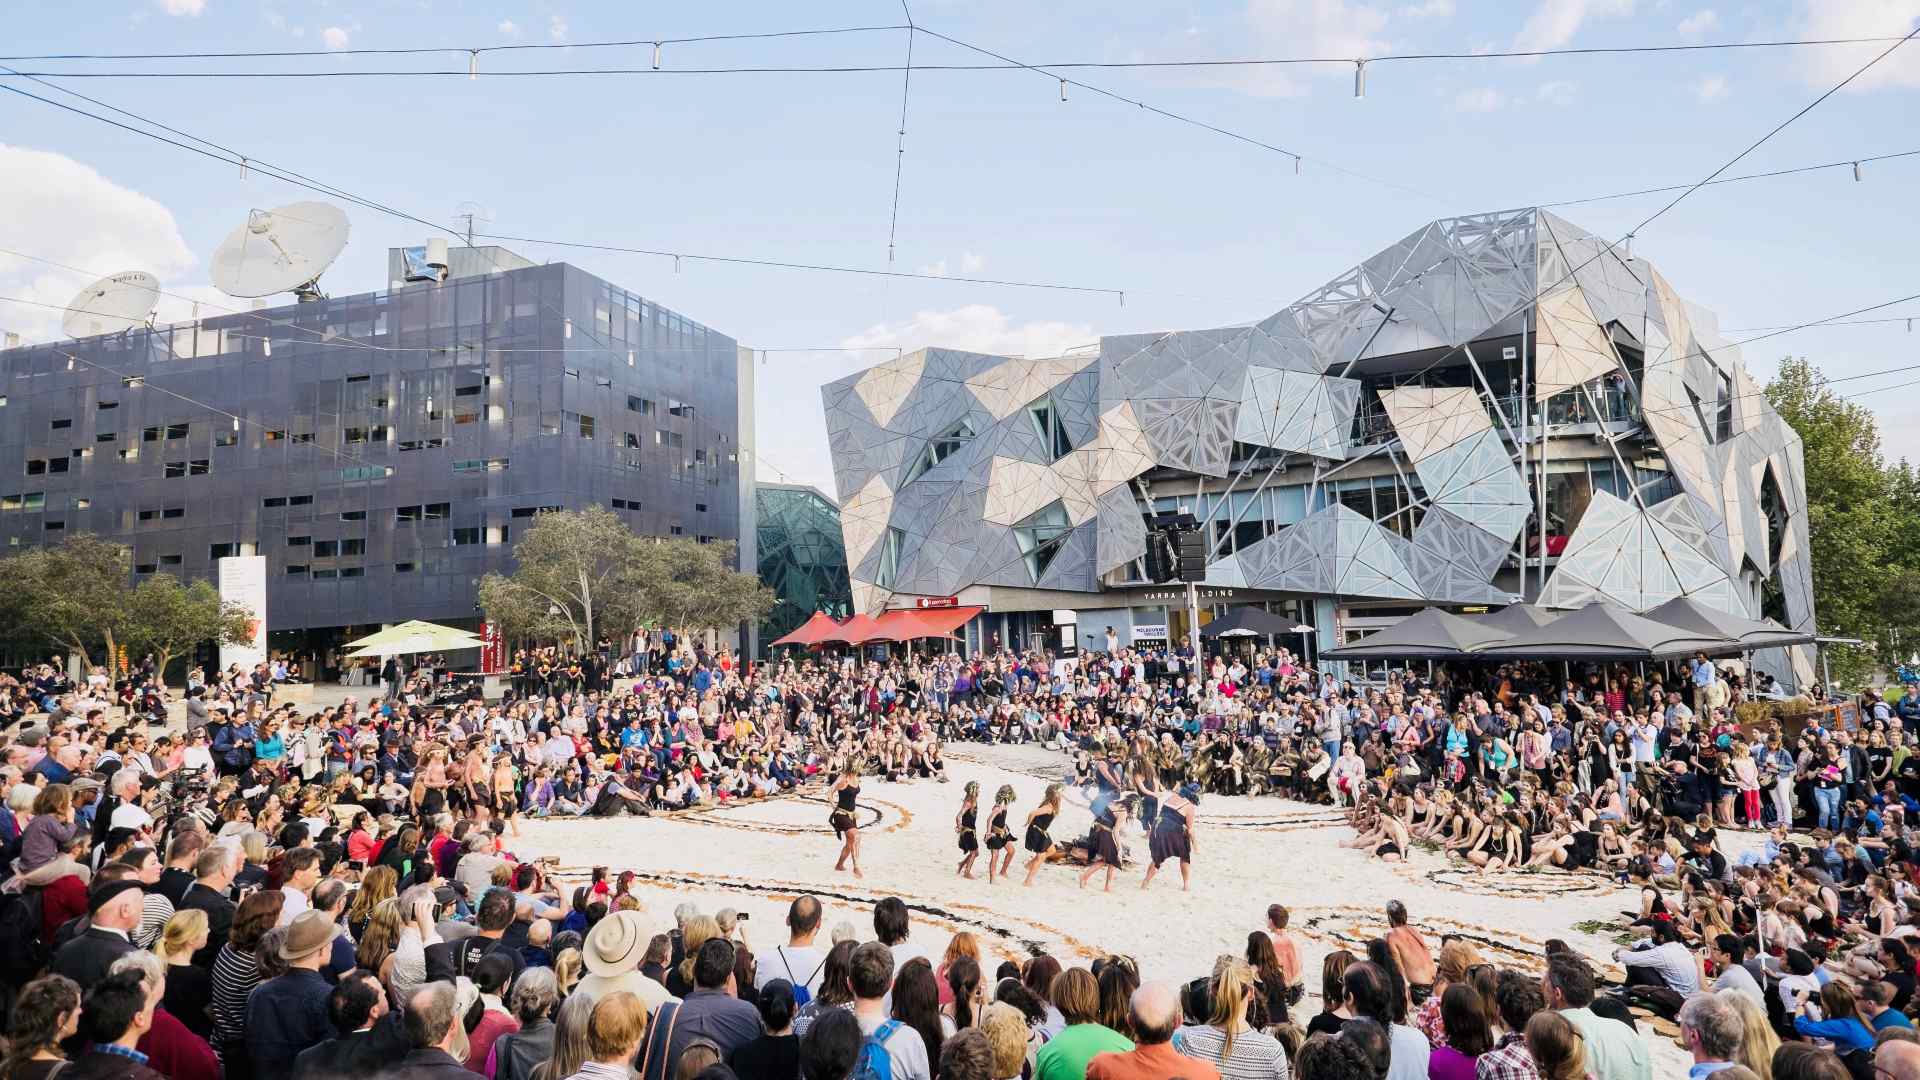 Fed Square's 20th Anniversary Month